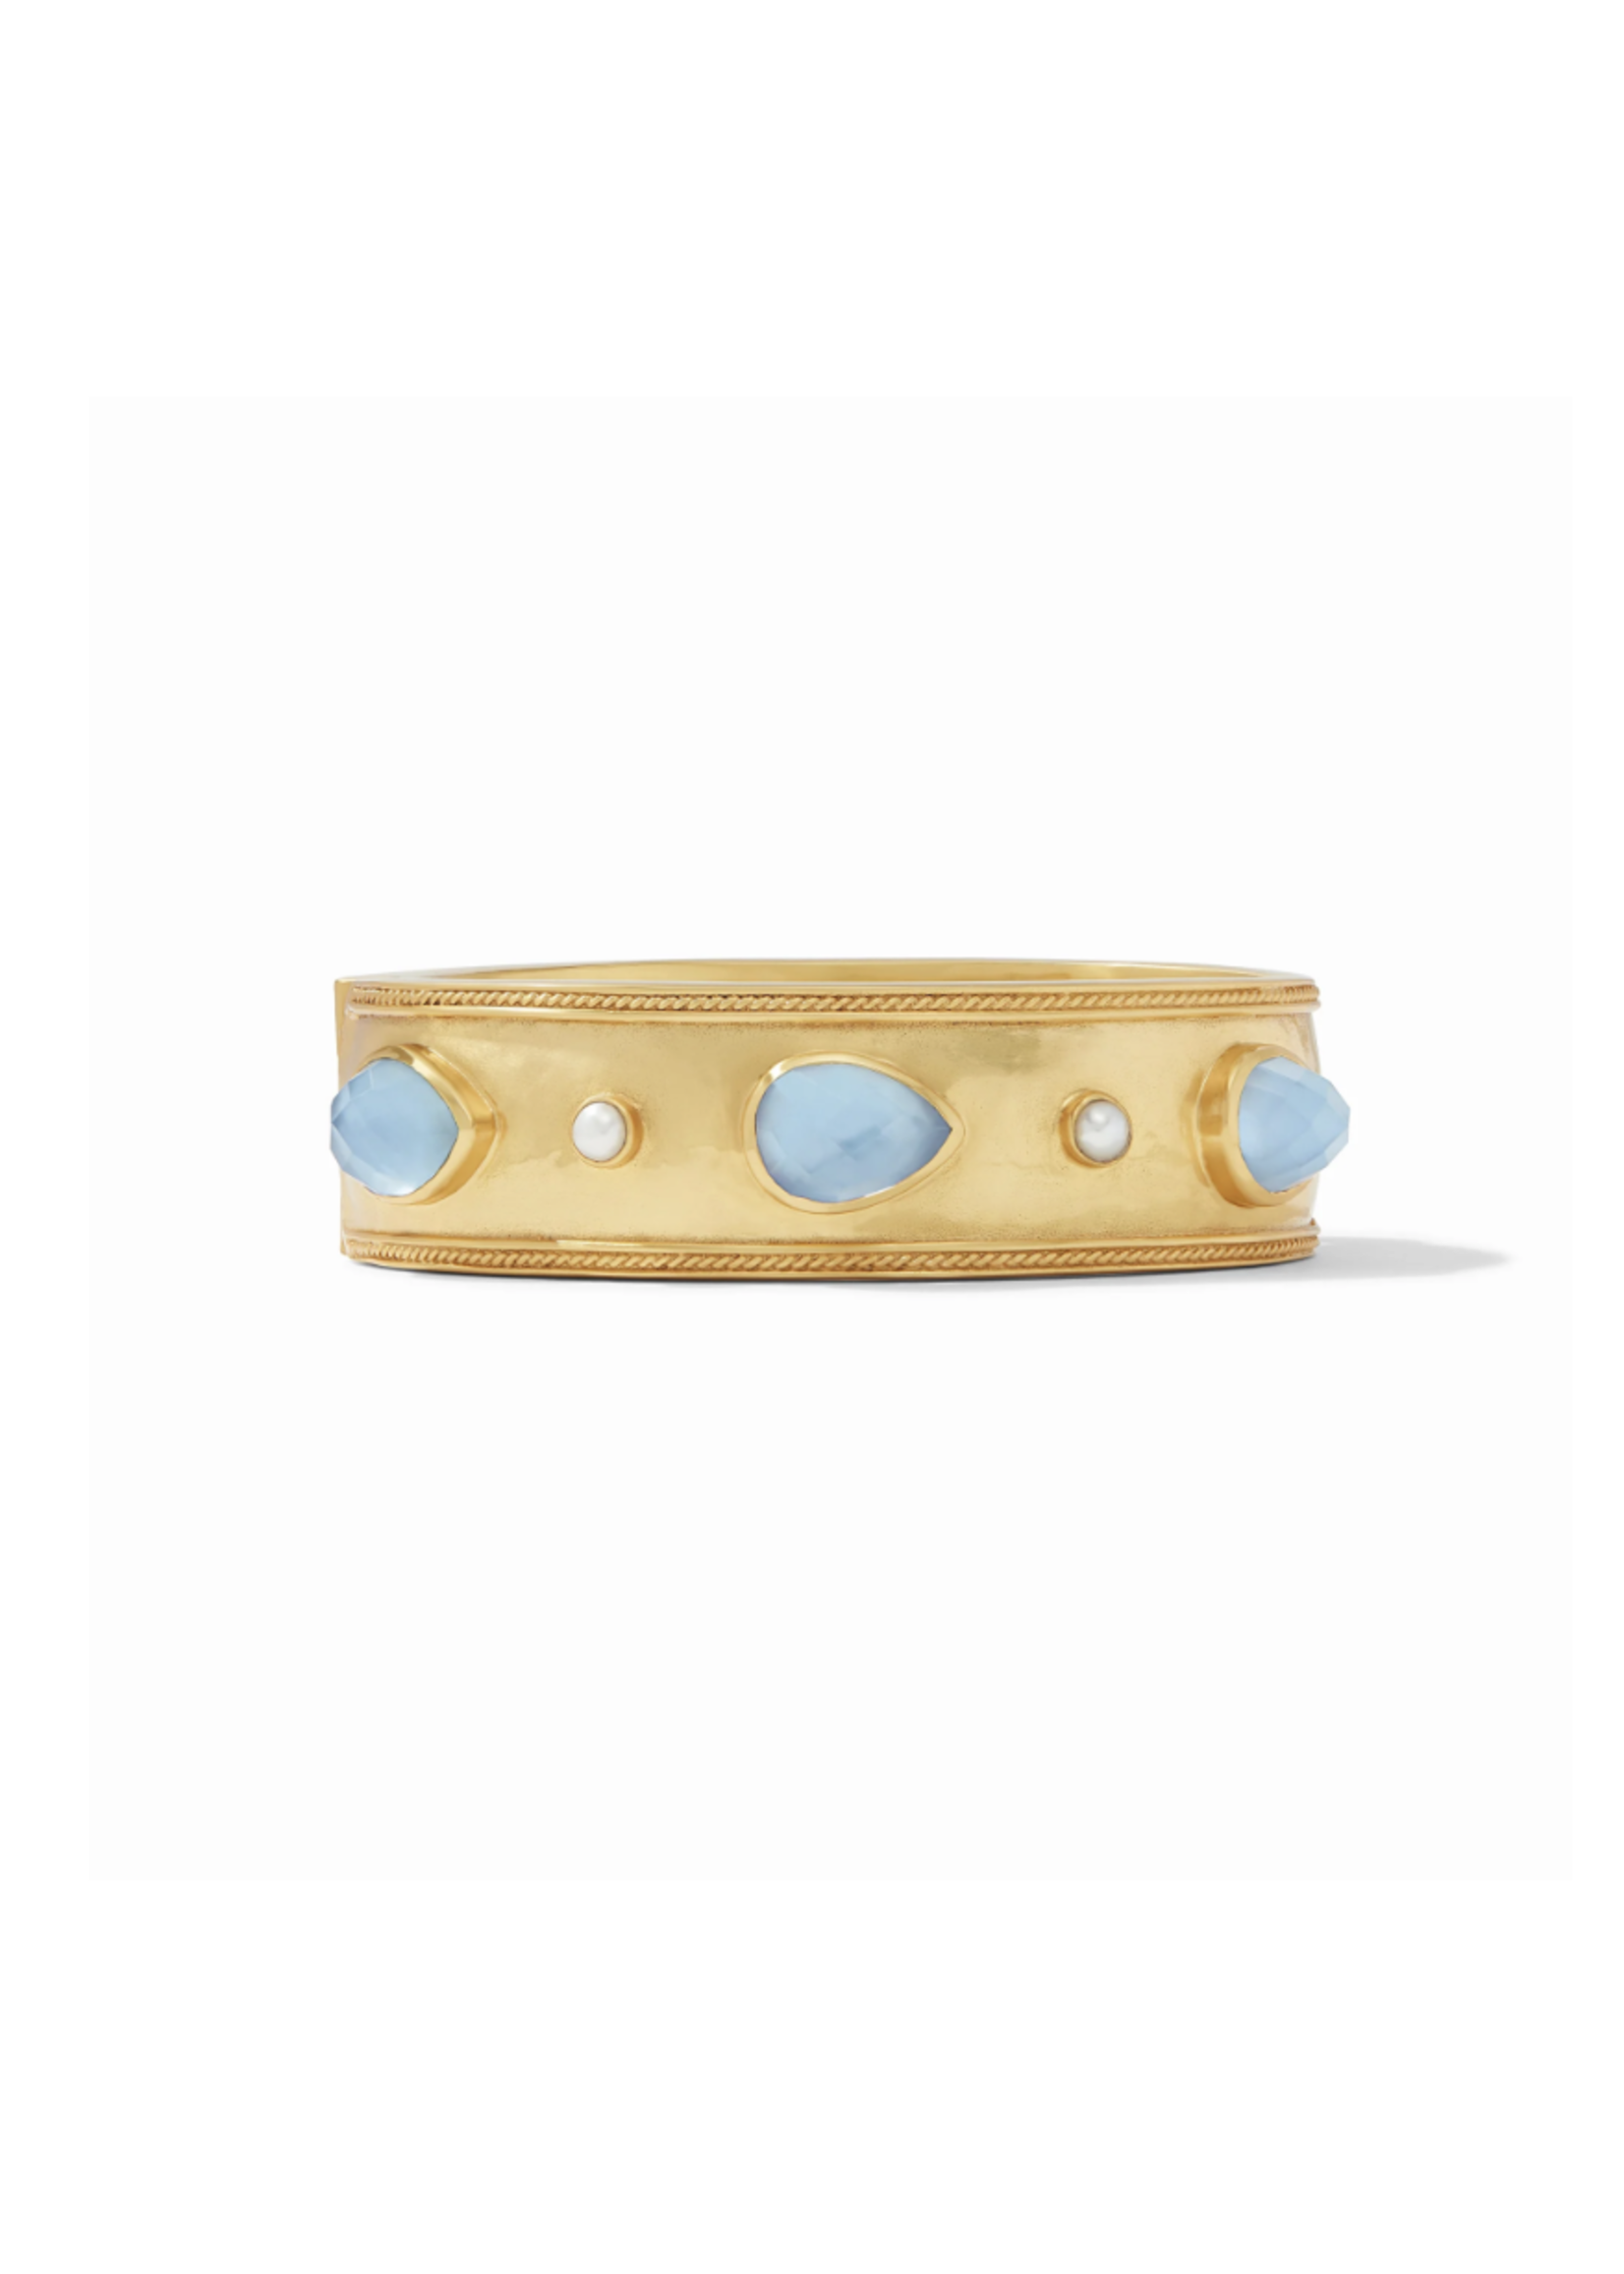 Julie Vos Cannes Statement Hinge Bangle Gold Iridescent Chalcedony Blue  w/ Pearl Accents - One Size